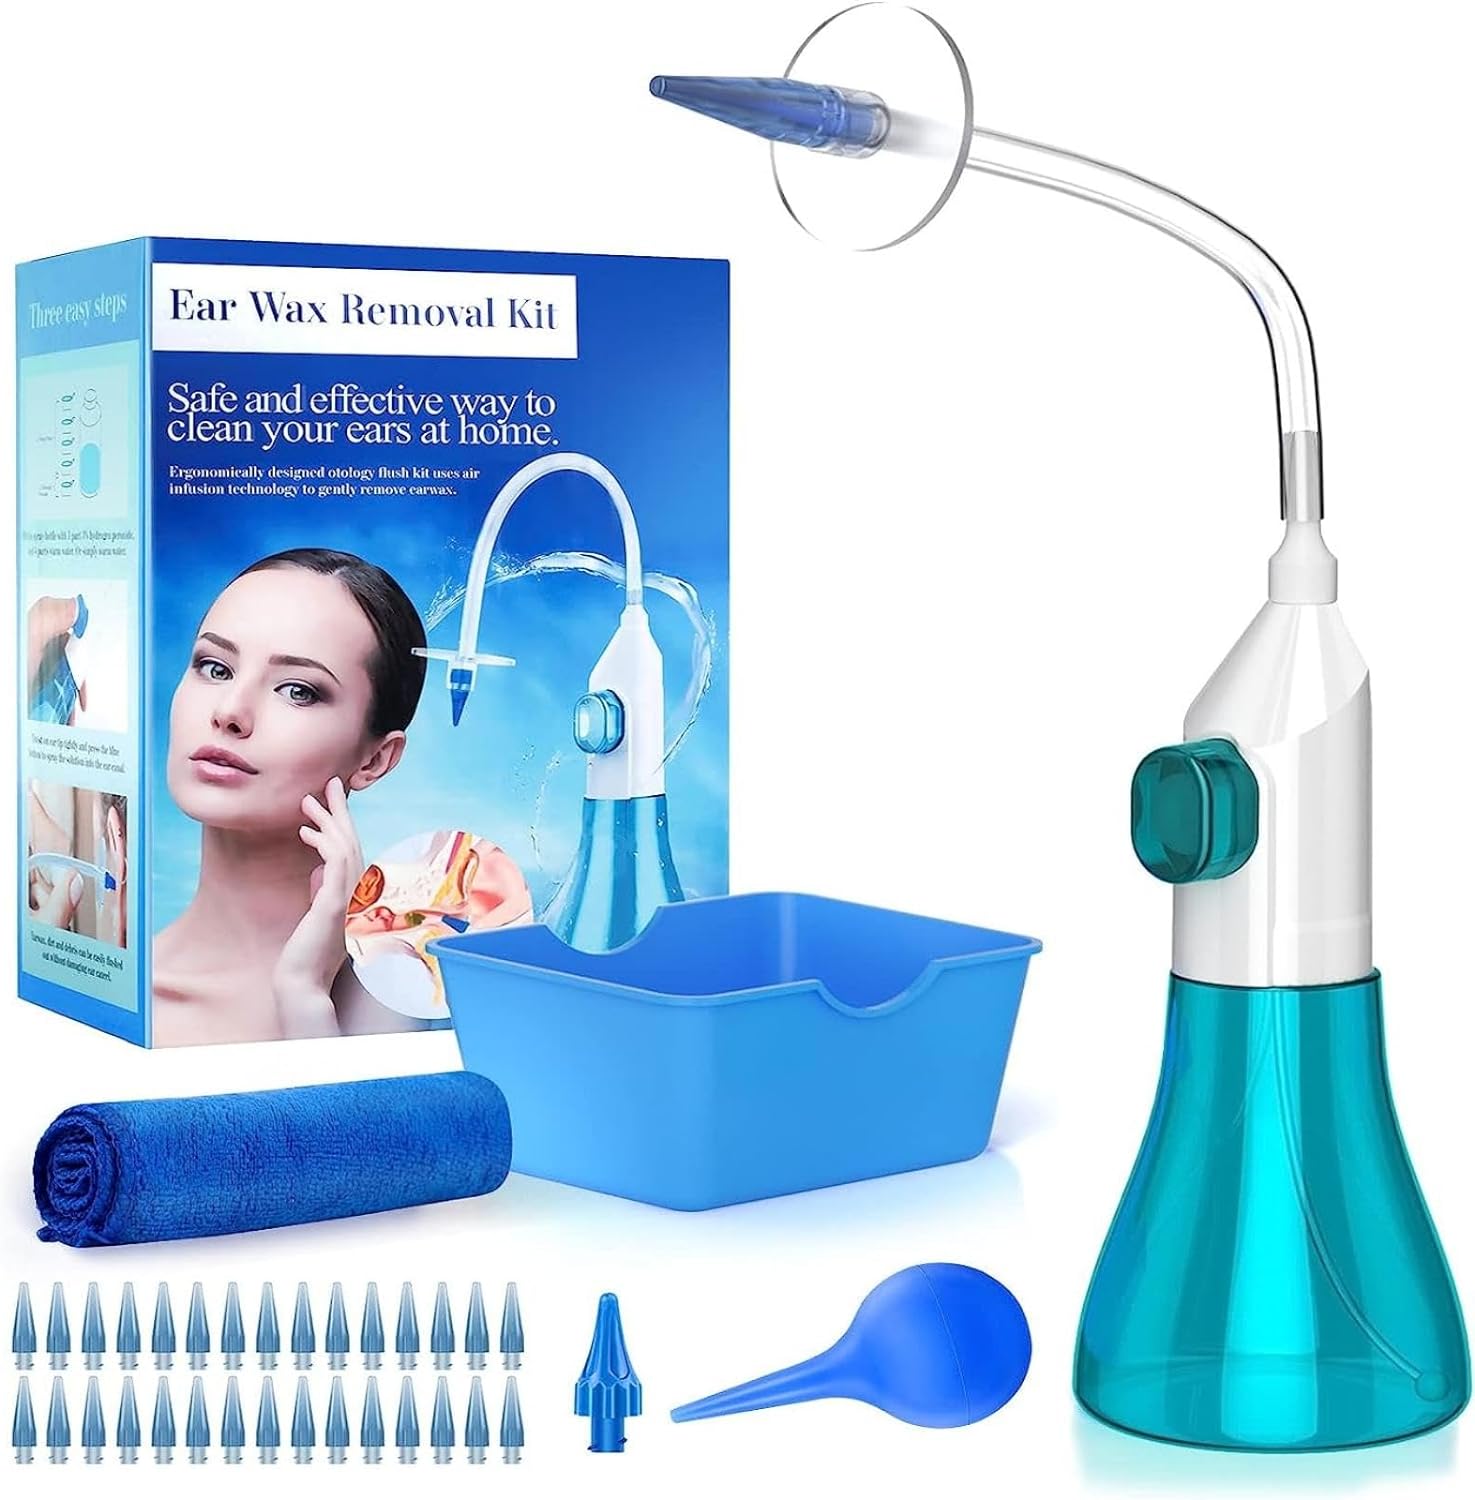 Hot Savings Alert - Shop Now for the Best Deals - WEUANY Ear Wax Removal Kit - Limited-Time Discount!